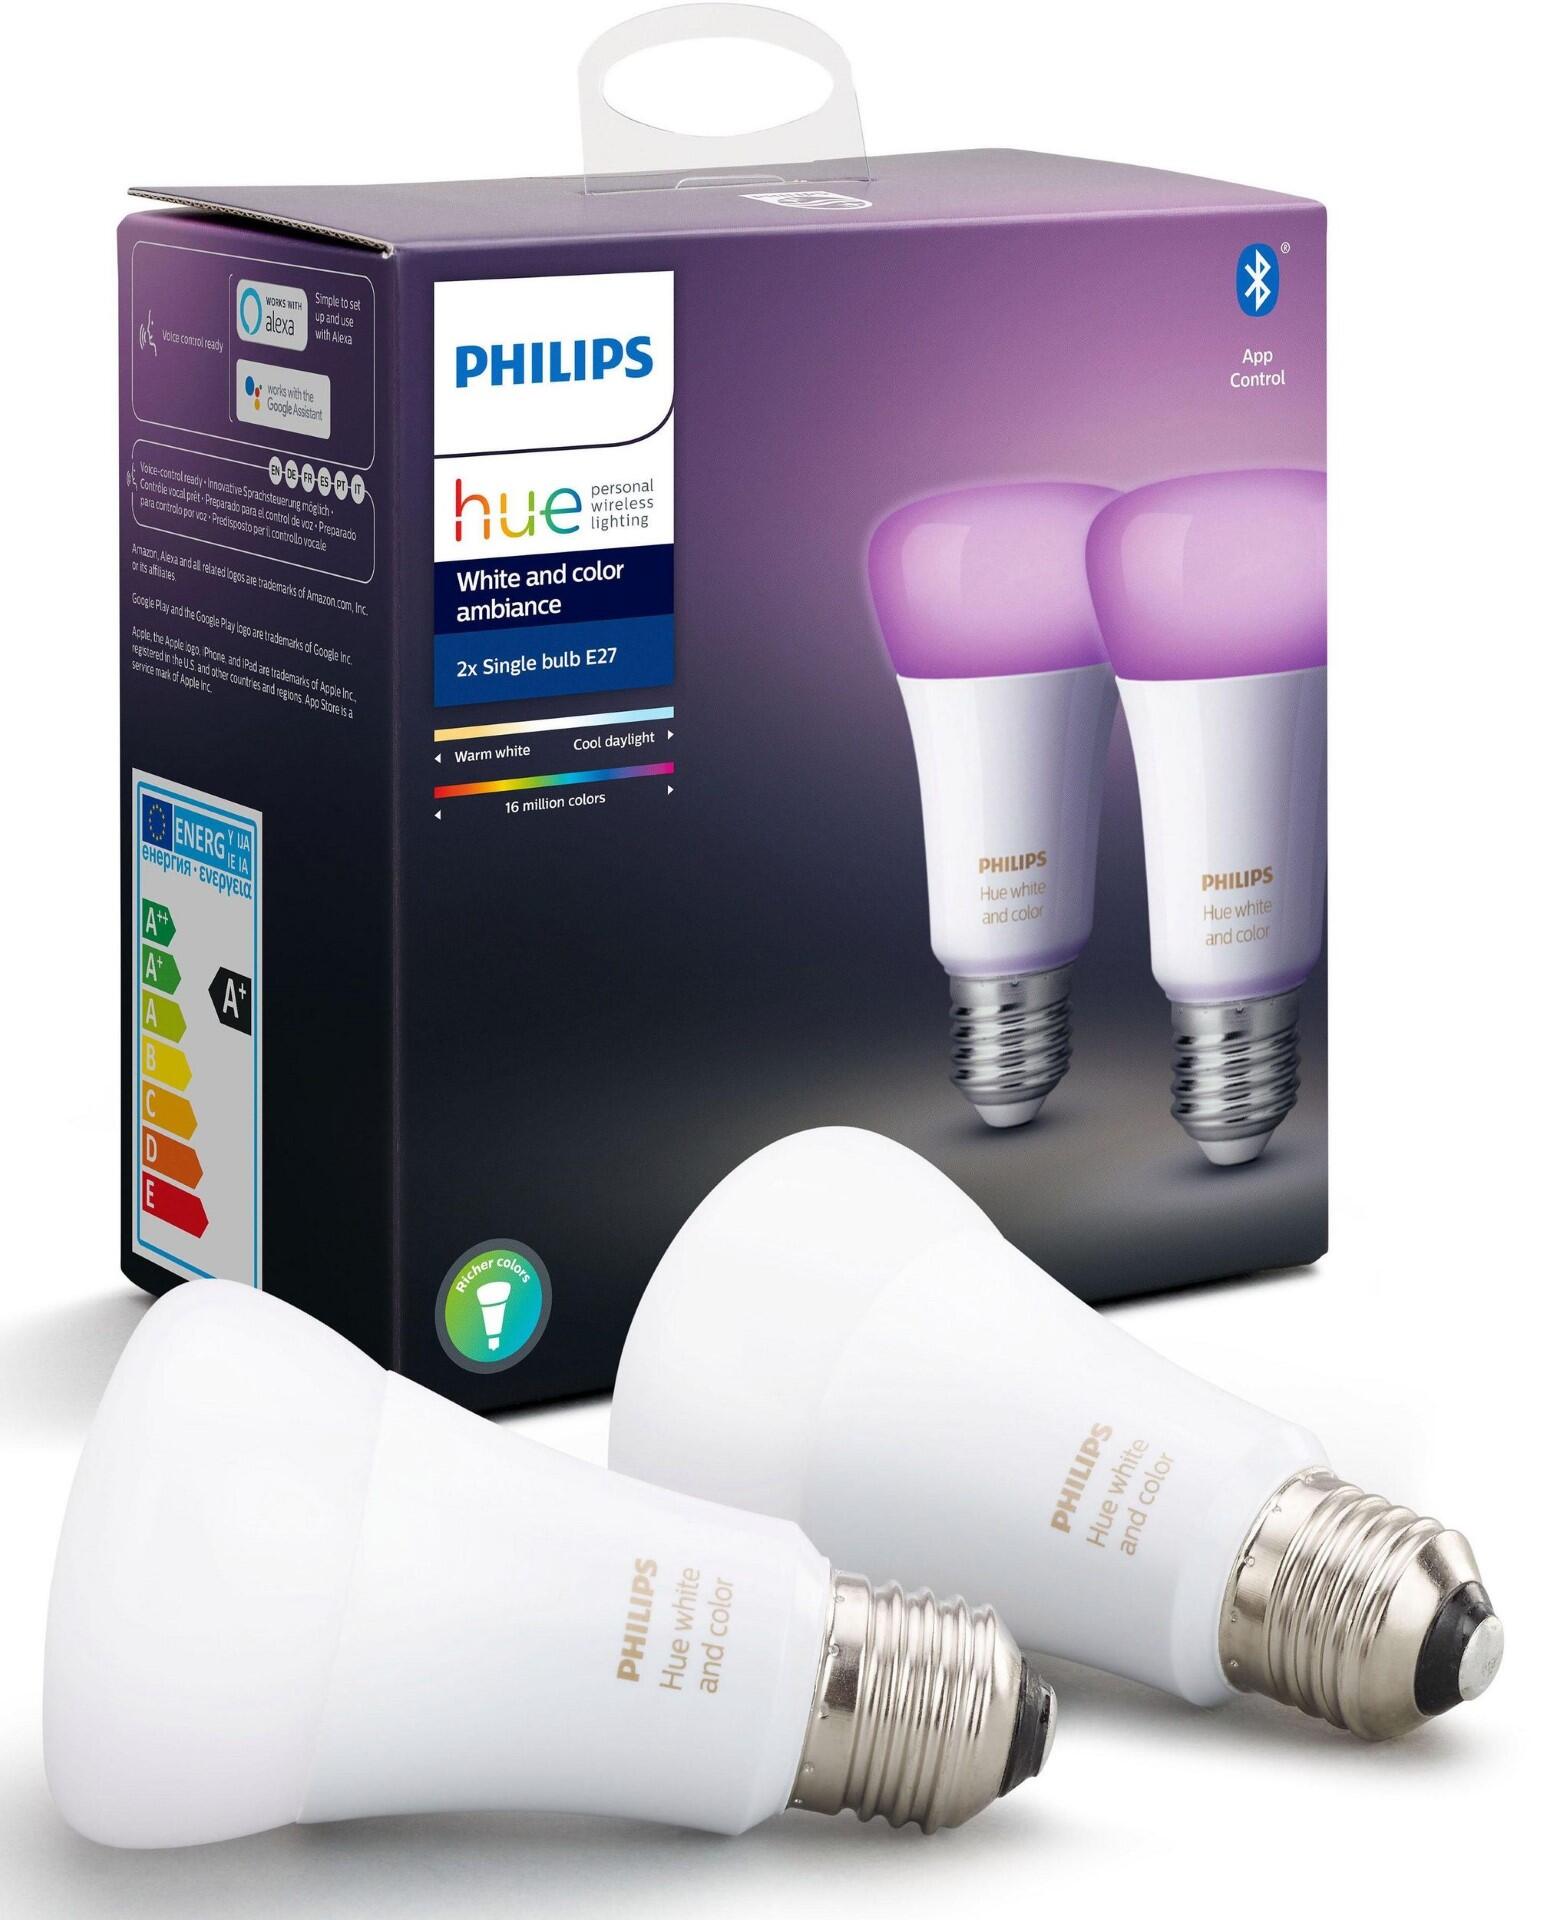 Philips+Hue+%C2%BBWhite+and+Color+Ambiance+Doppelpack+2x806lm%C2%AB